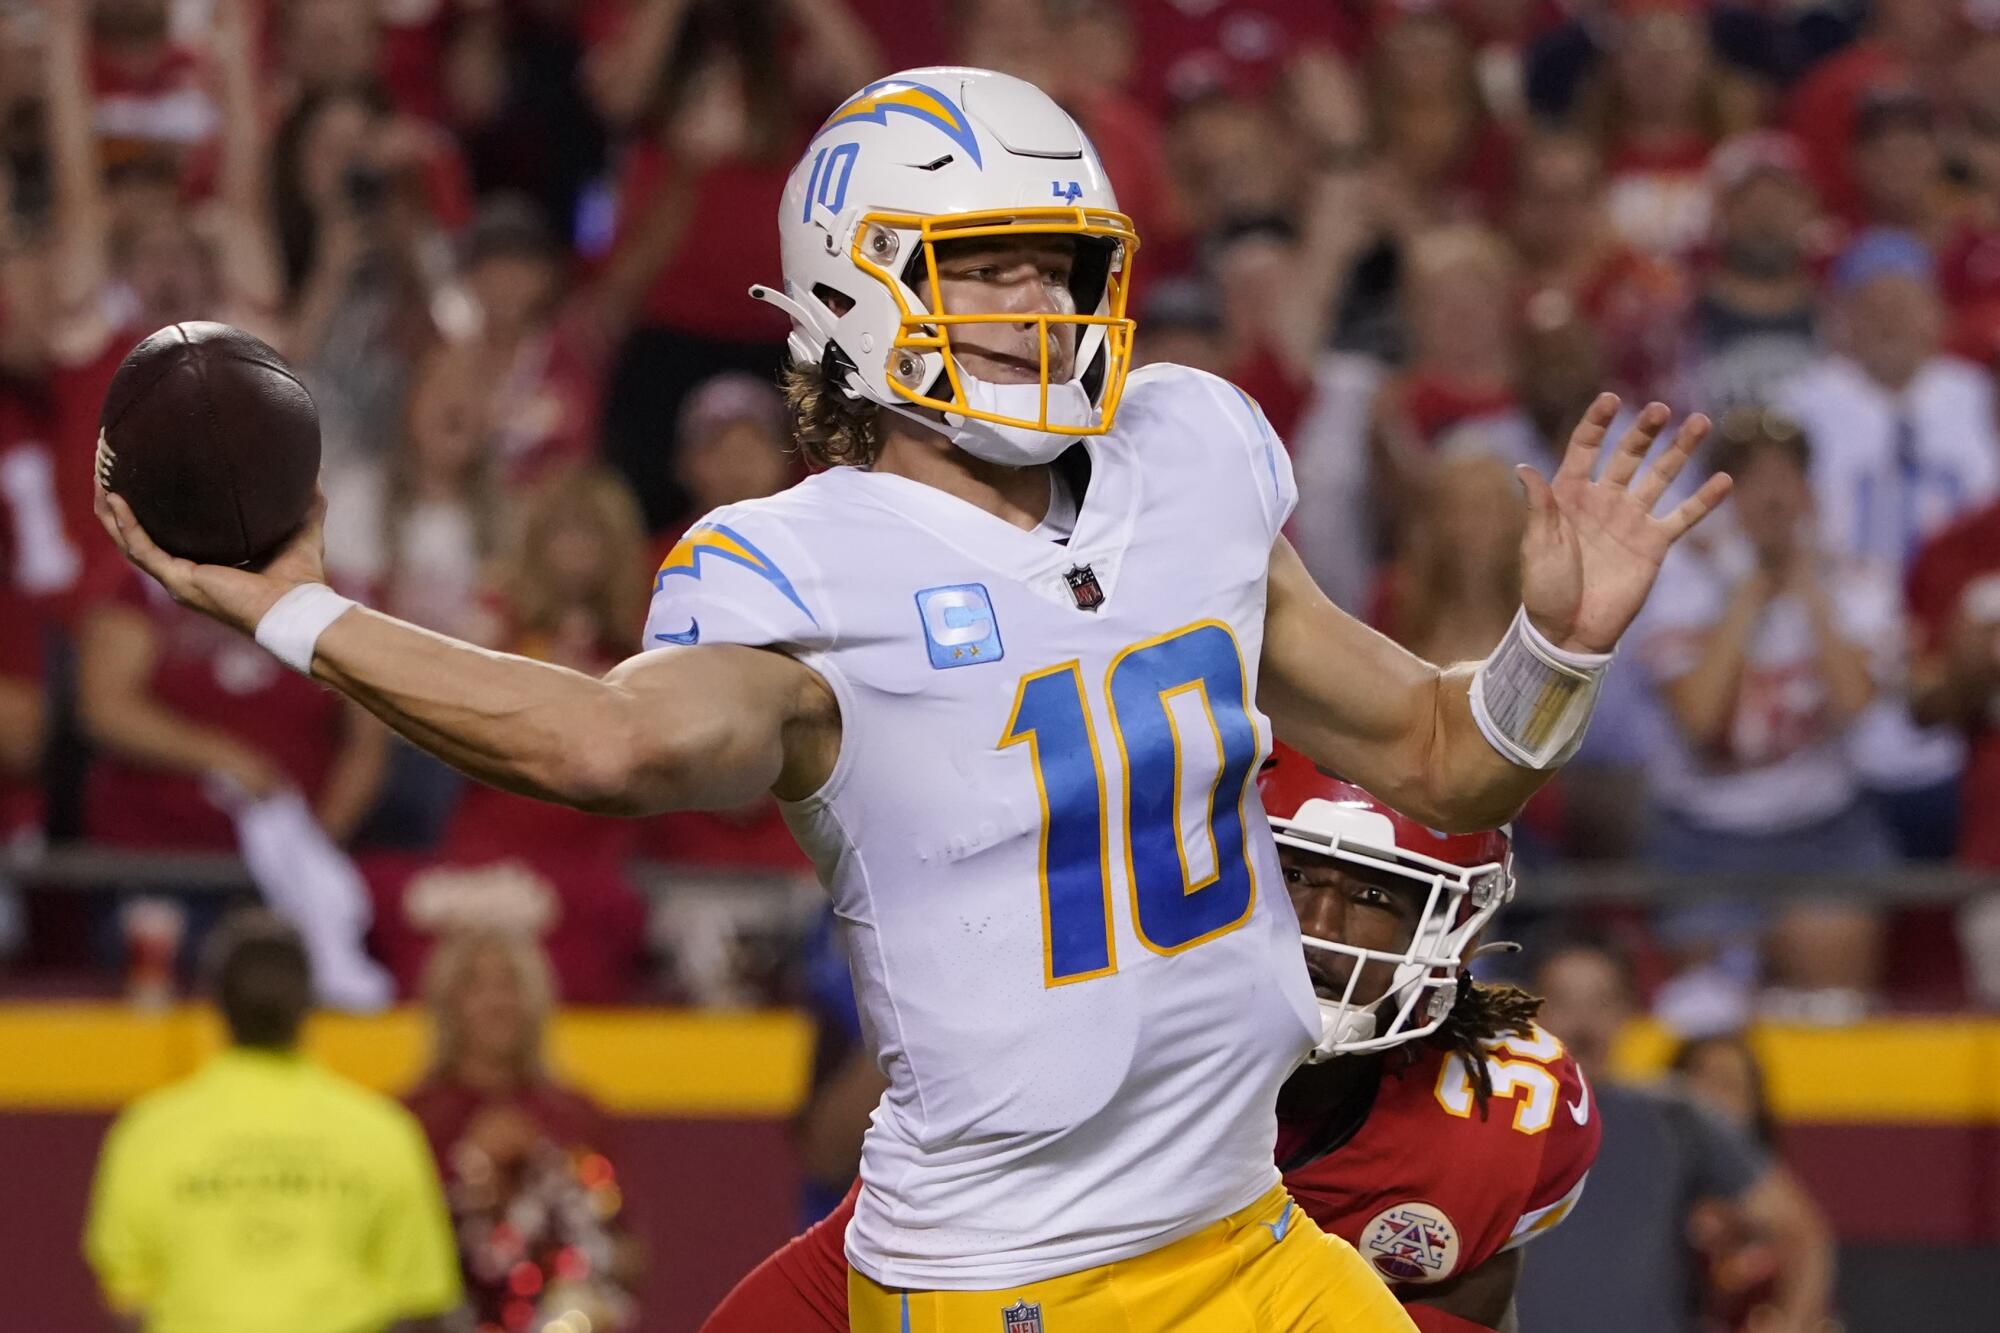 49ers vs. Chargers 3rd quarter: It'll take a second half comeback